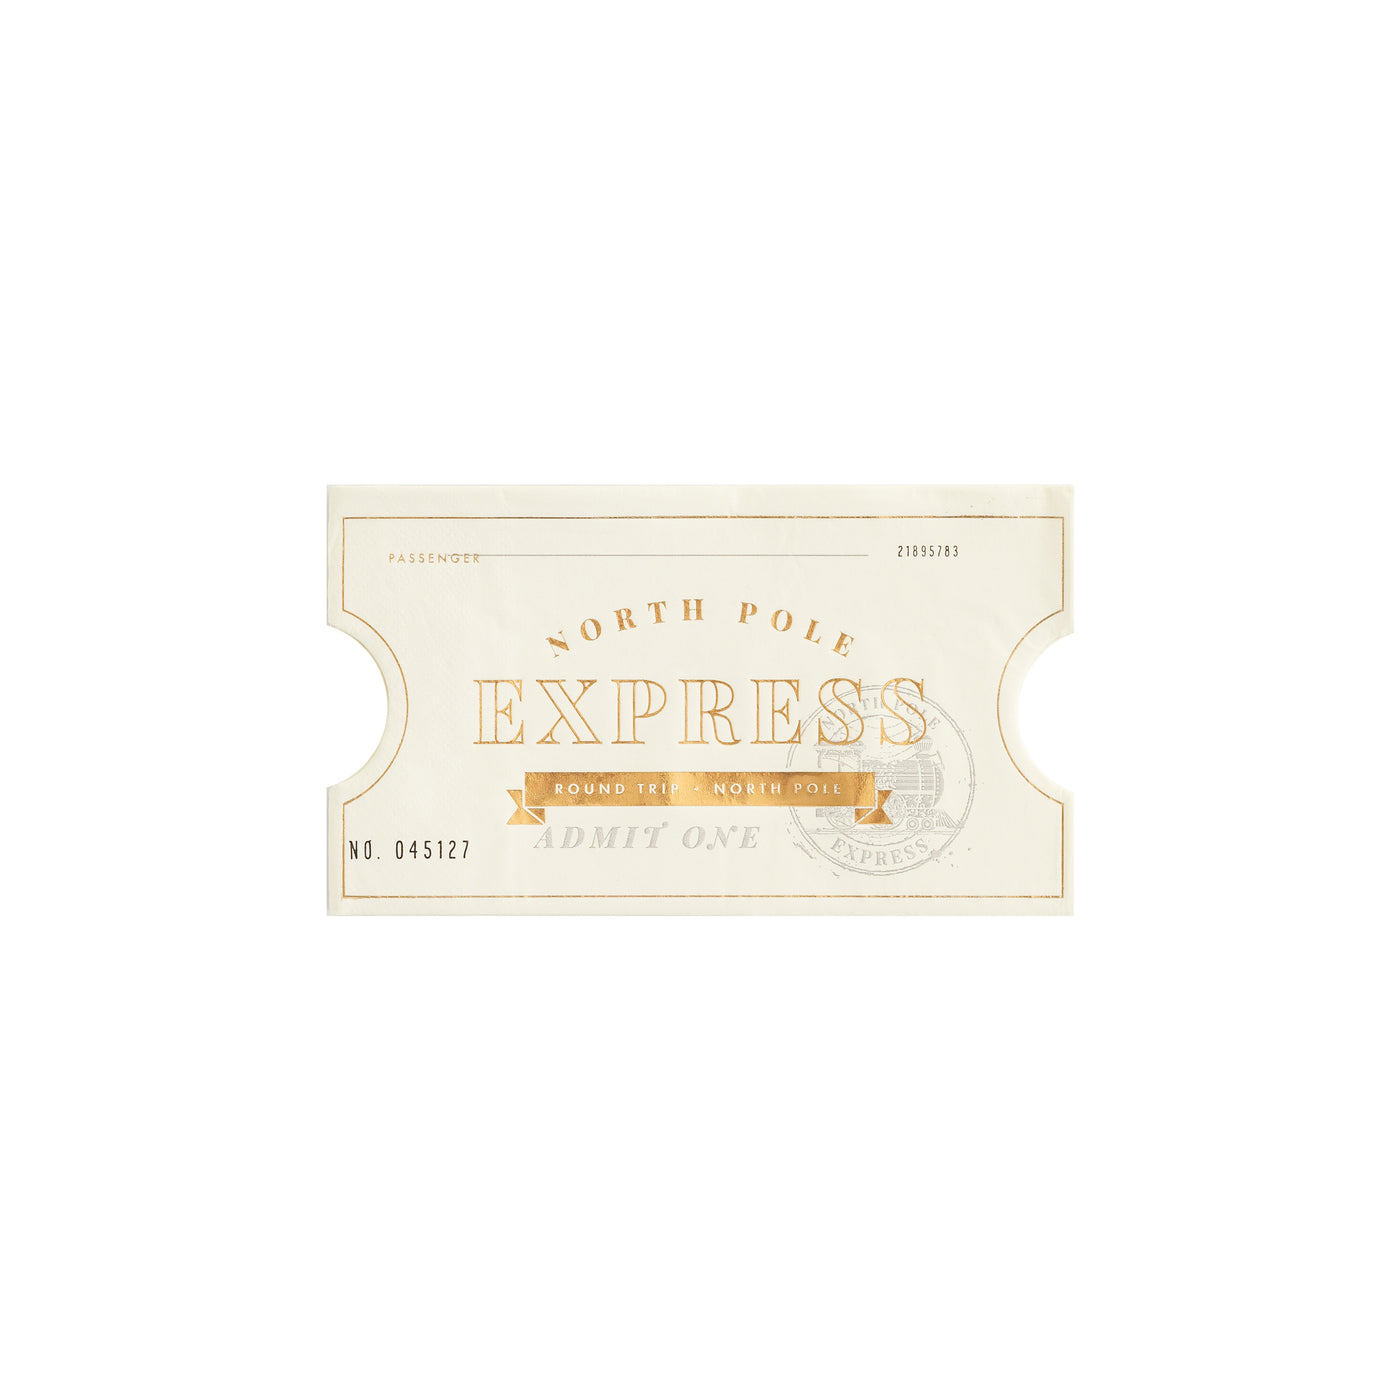 NOR939 - North Pole Express Ticket Shaped Guest Napkin